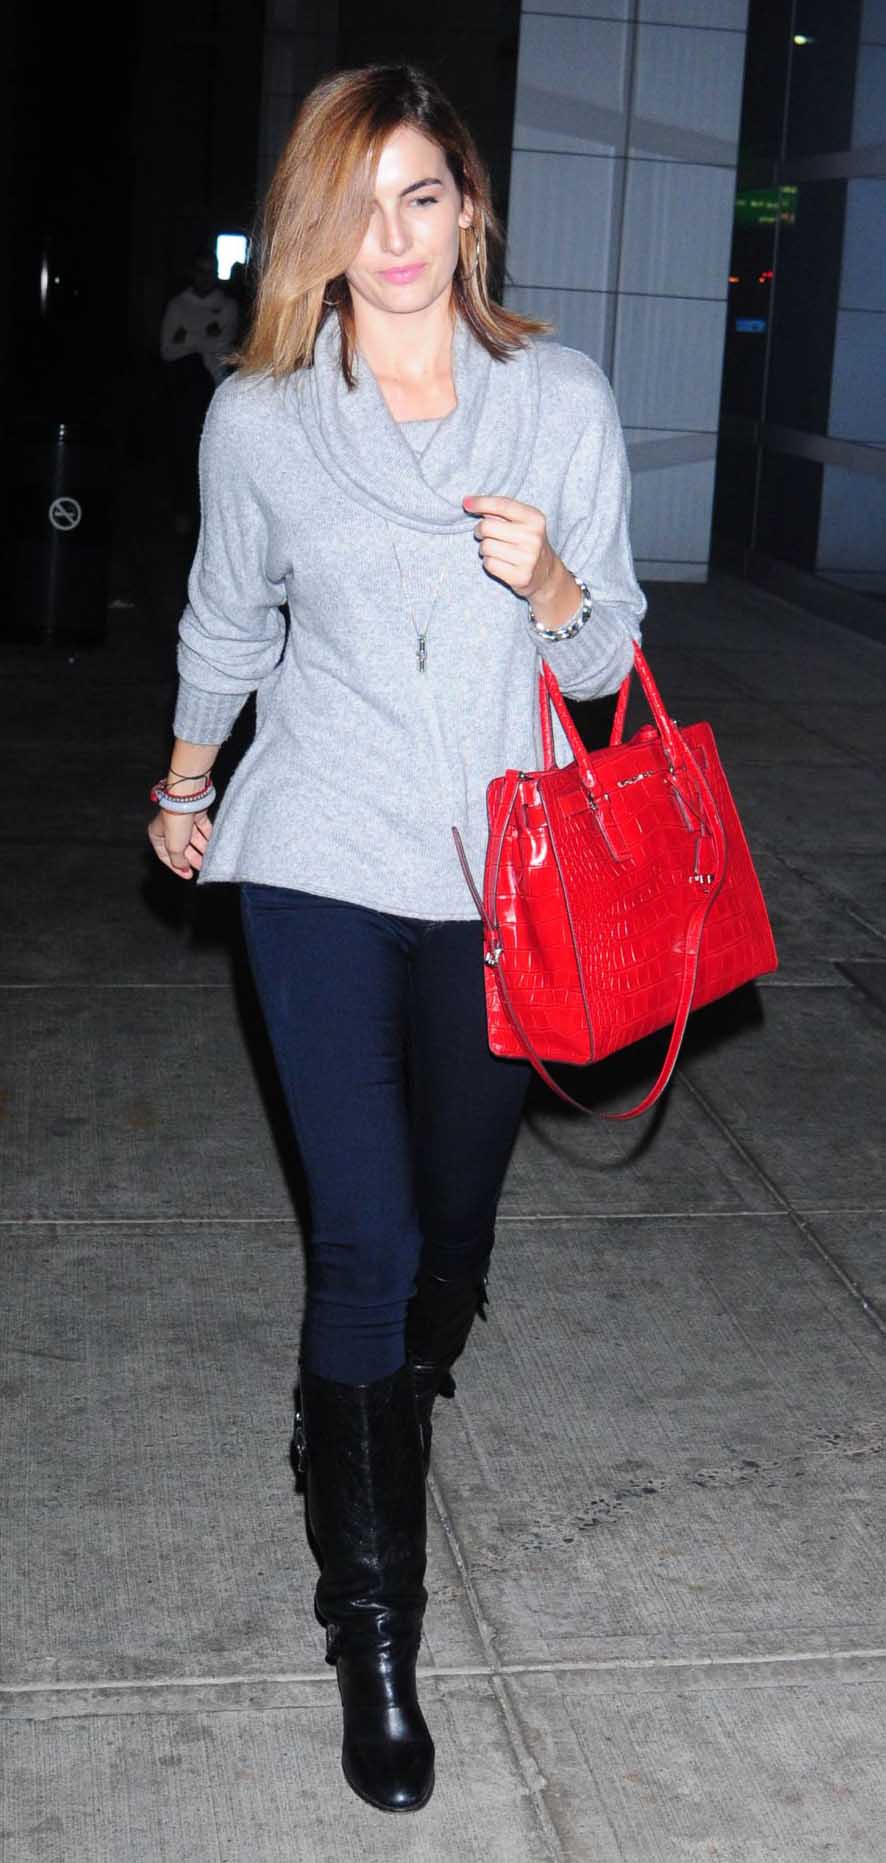 blue-navy-skinny-jeans-grayl-sweater-cowlneck-red-bag-hoops-black-shoe-boots-camillabelle-hairr-fall-winter-weekend.jpg